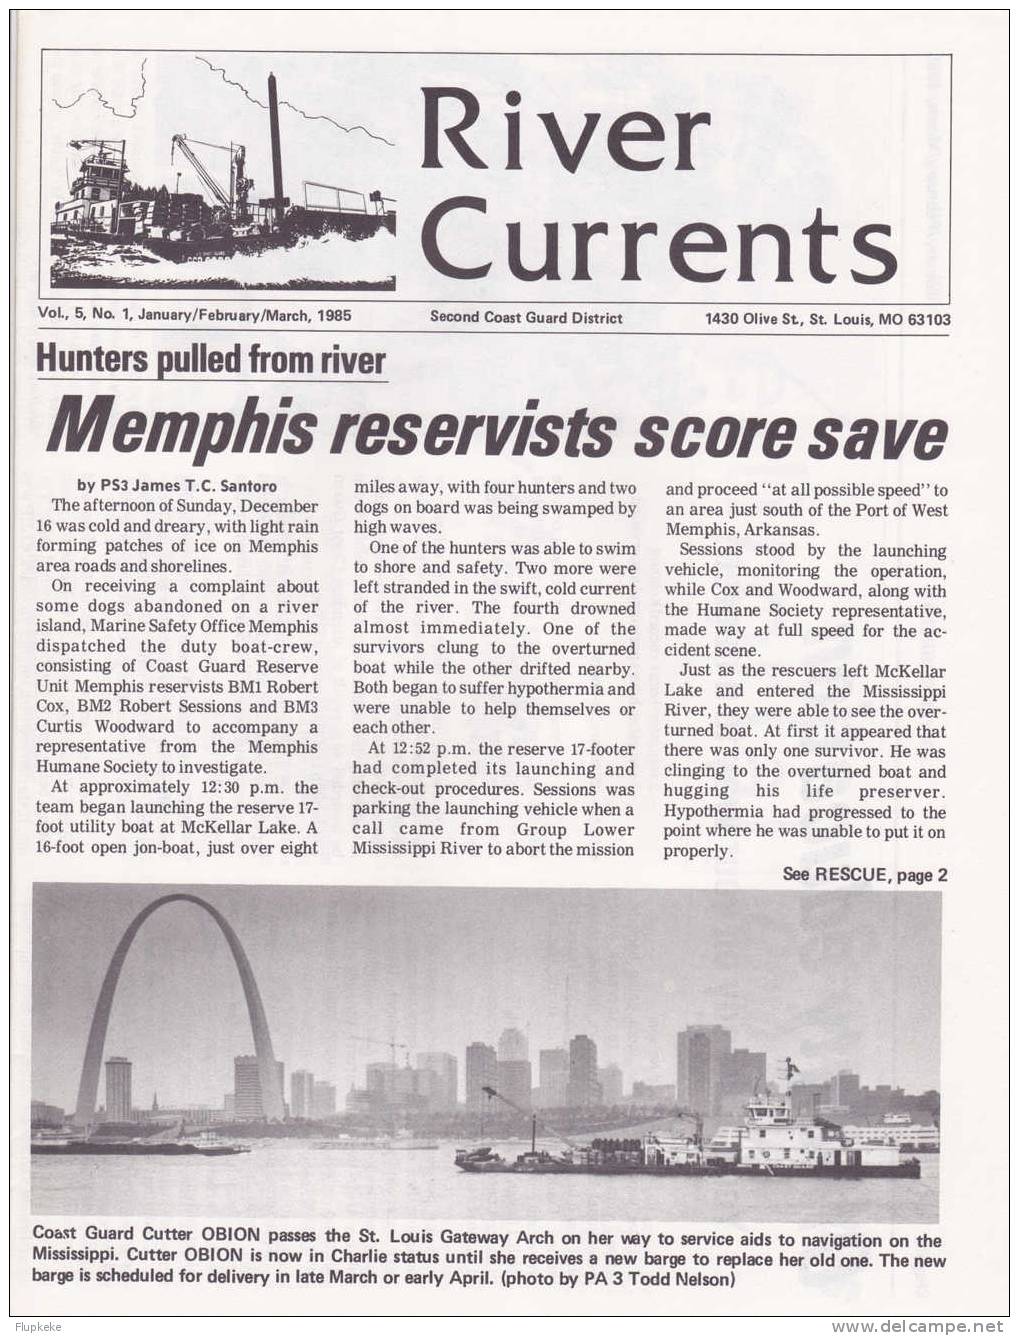 River Currents 01 January February March 1985 Vol. 5 Second Coast Guard District - US Army